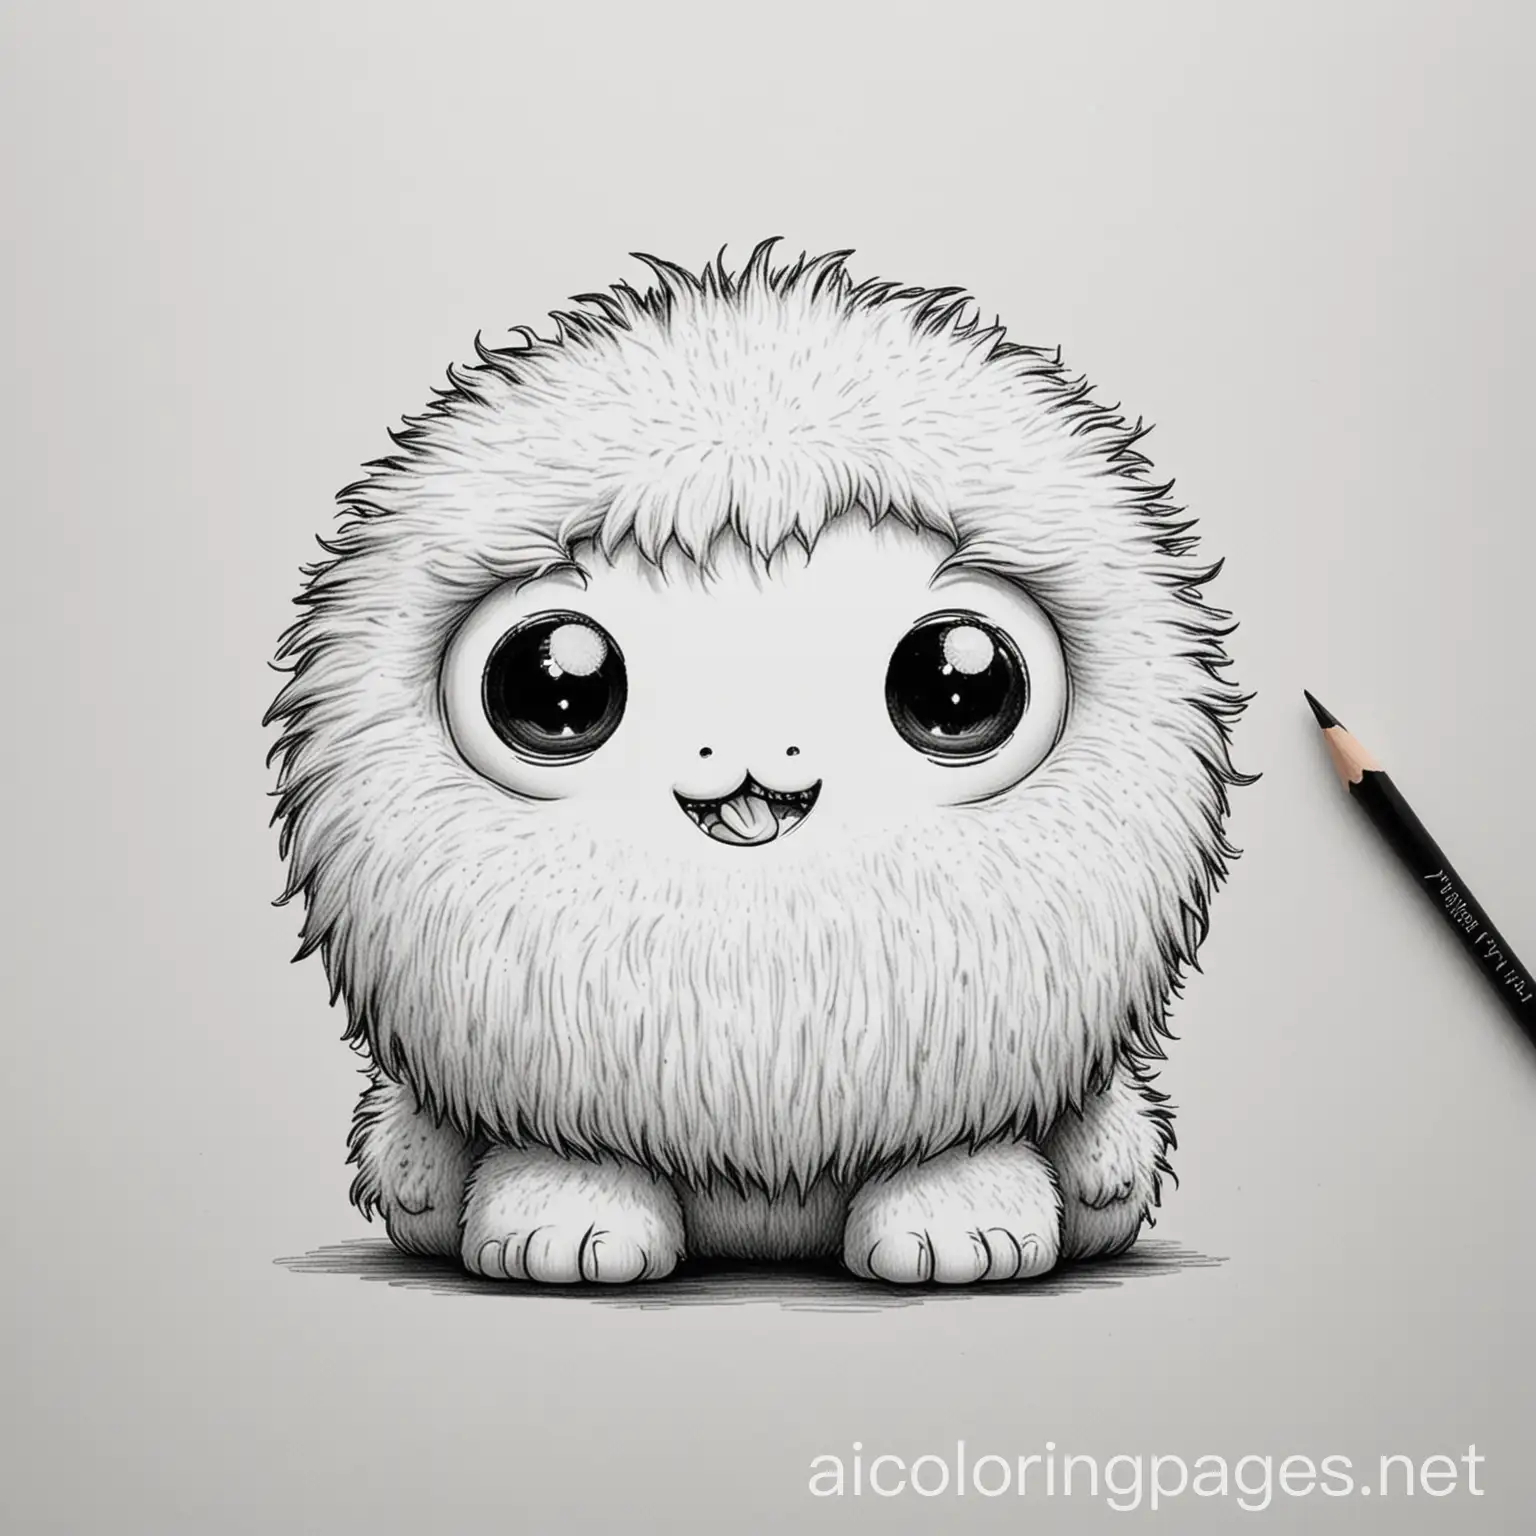 A small, round fuzzy monster with soft fur in pastel colours. Snuggle bug is shy but loves giving hugs and cuddling up with friends. It has big, round eyes and floppy ears. Colouring Page, black and white, line art, white background, Simplicity, Ample White Space. The background of the colouring page is plain white to make it easy for young children to colour within the lines. The outlines of all the subjects are easy to distinguish, making it simple for kids to colour without too much difficulty ,, Coloring Page, black and white, line art, white background, Simplicity, Ample White Space. The background of the coloring page is plain white to make it easy for young children to color within the lines. The outlines of all the subjects are easy to distinguish, making it simple for kids to color without too much difficulty